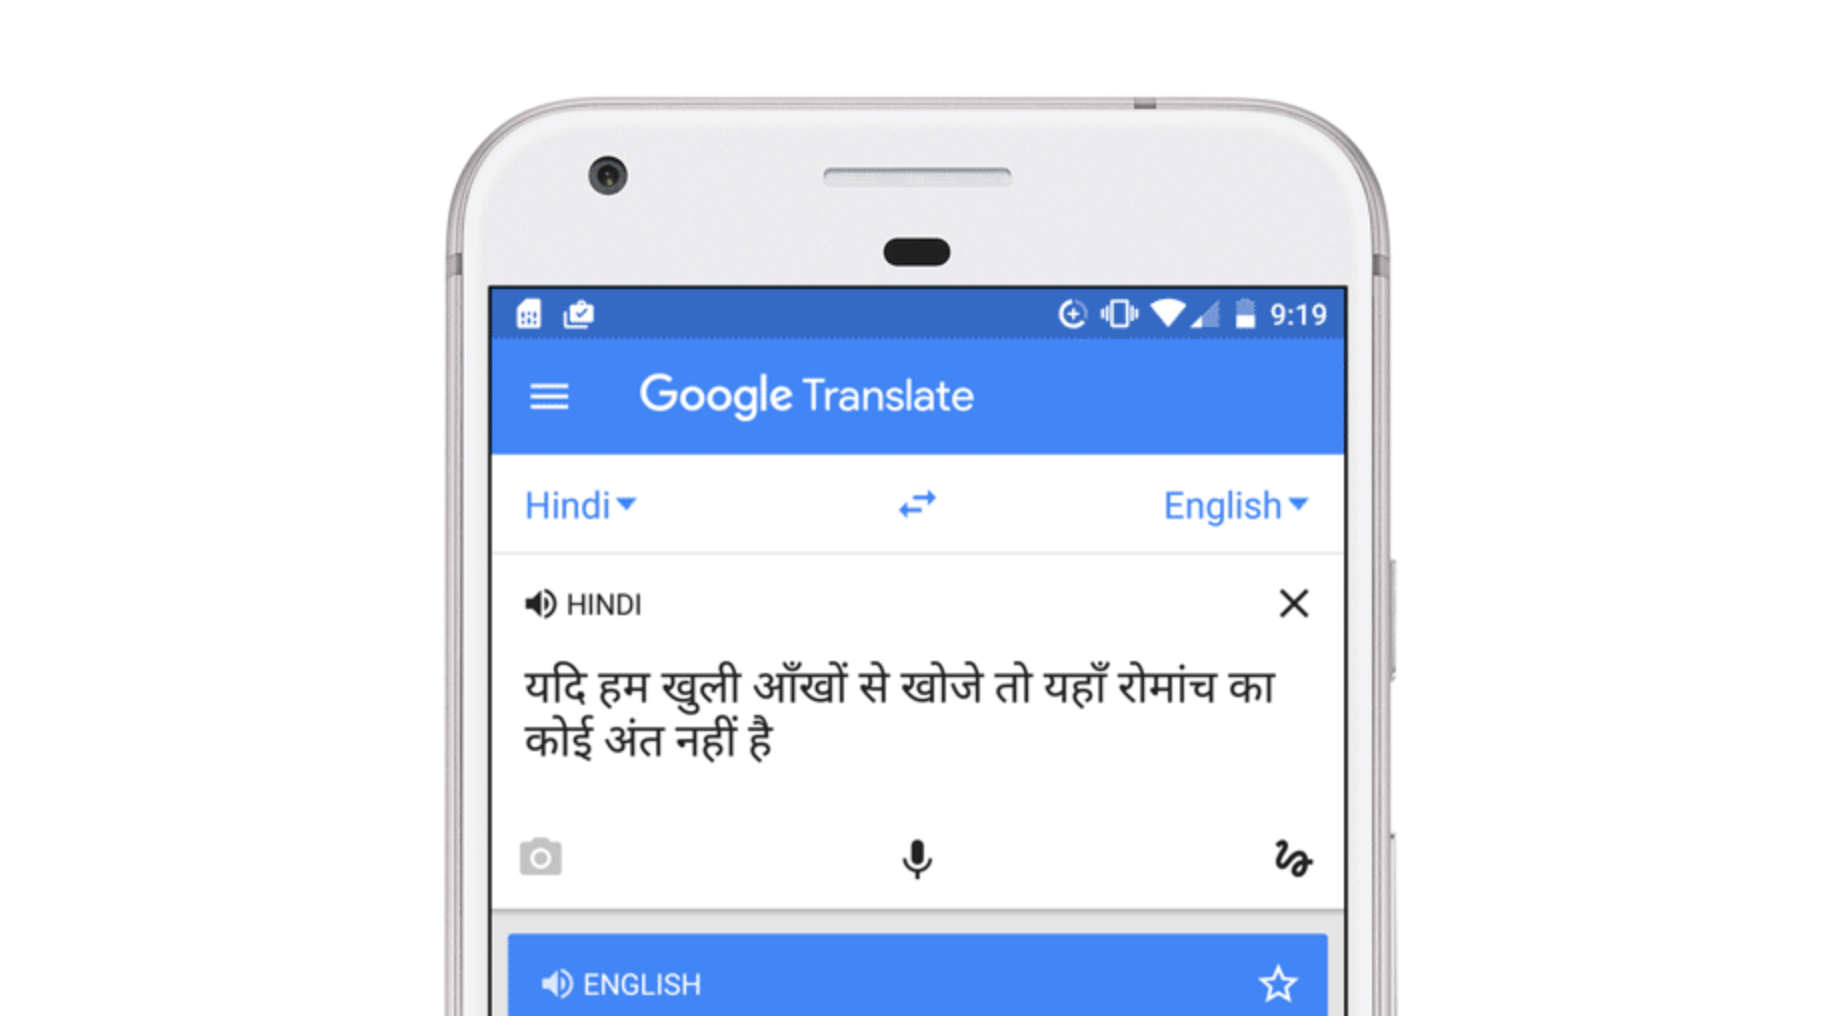 Google Translate will now help you more accurately decipher Hindi, Russian, and Vietnamese languages